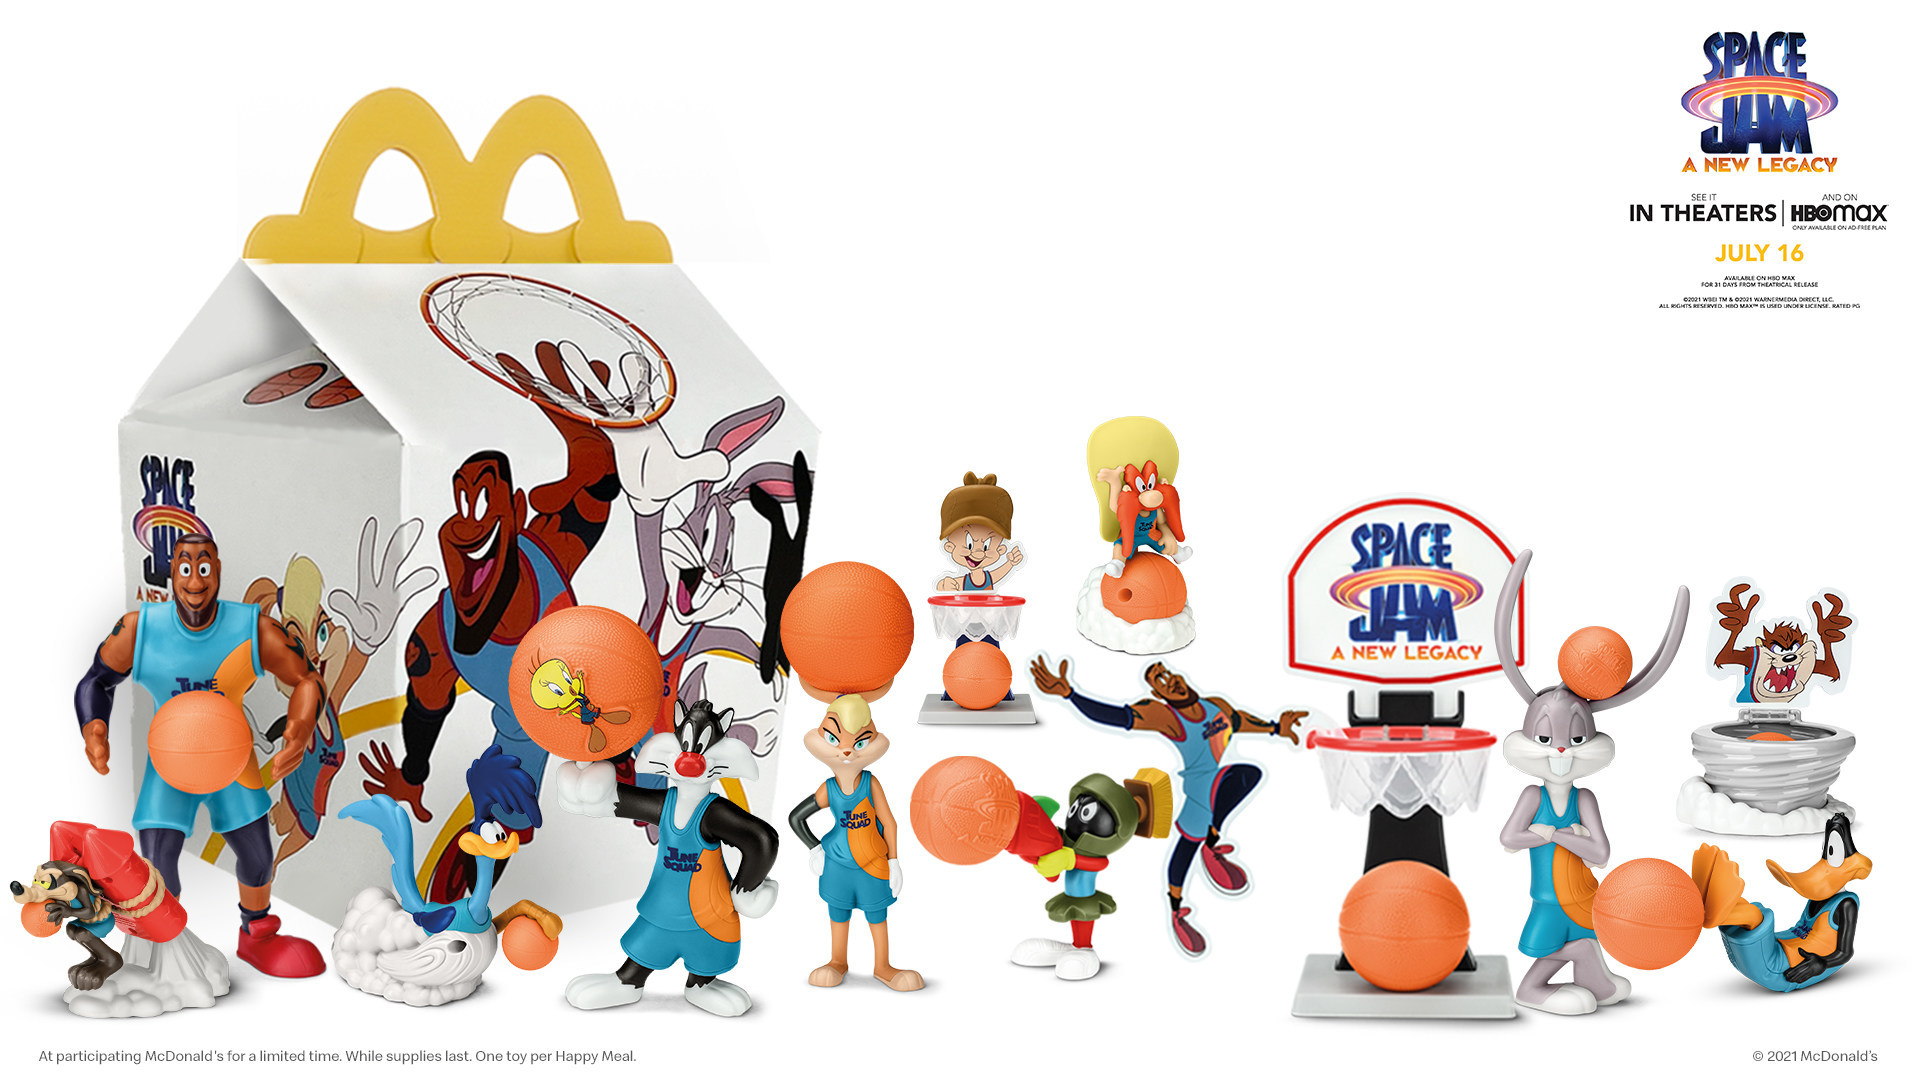 2021 McDONALD'S Space Jam New Legacy Lebron Warner Bros HAPPY MEAL TOYS Or Set 